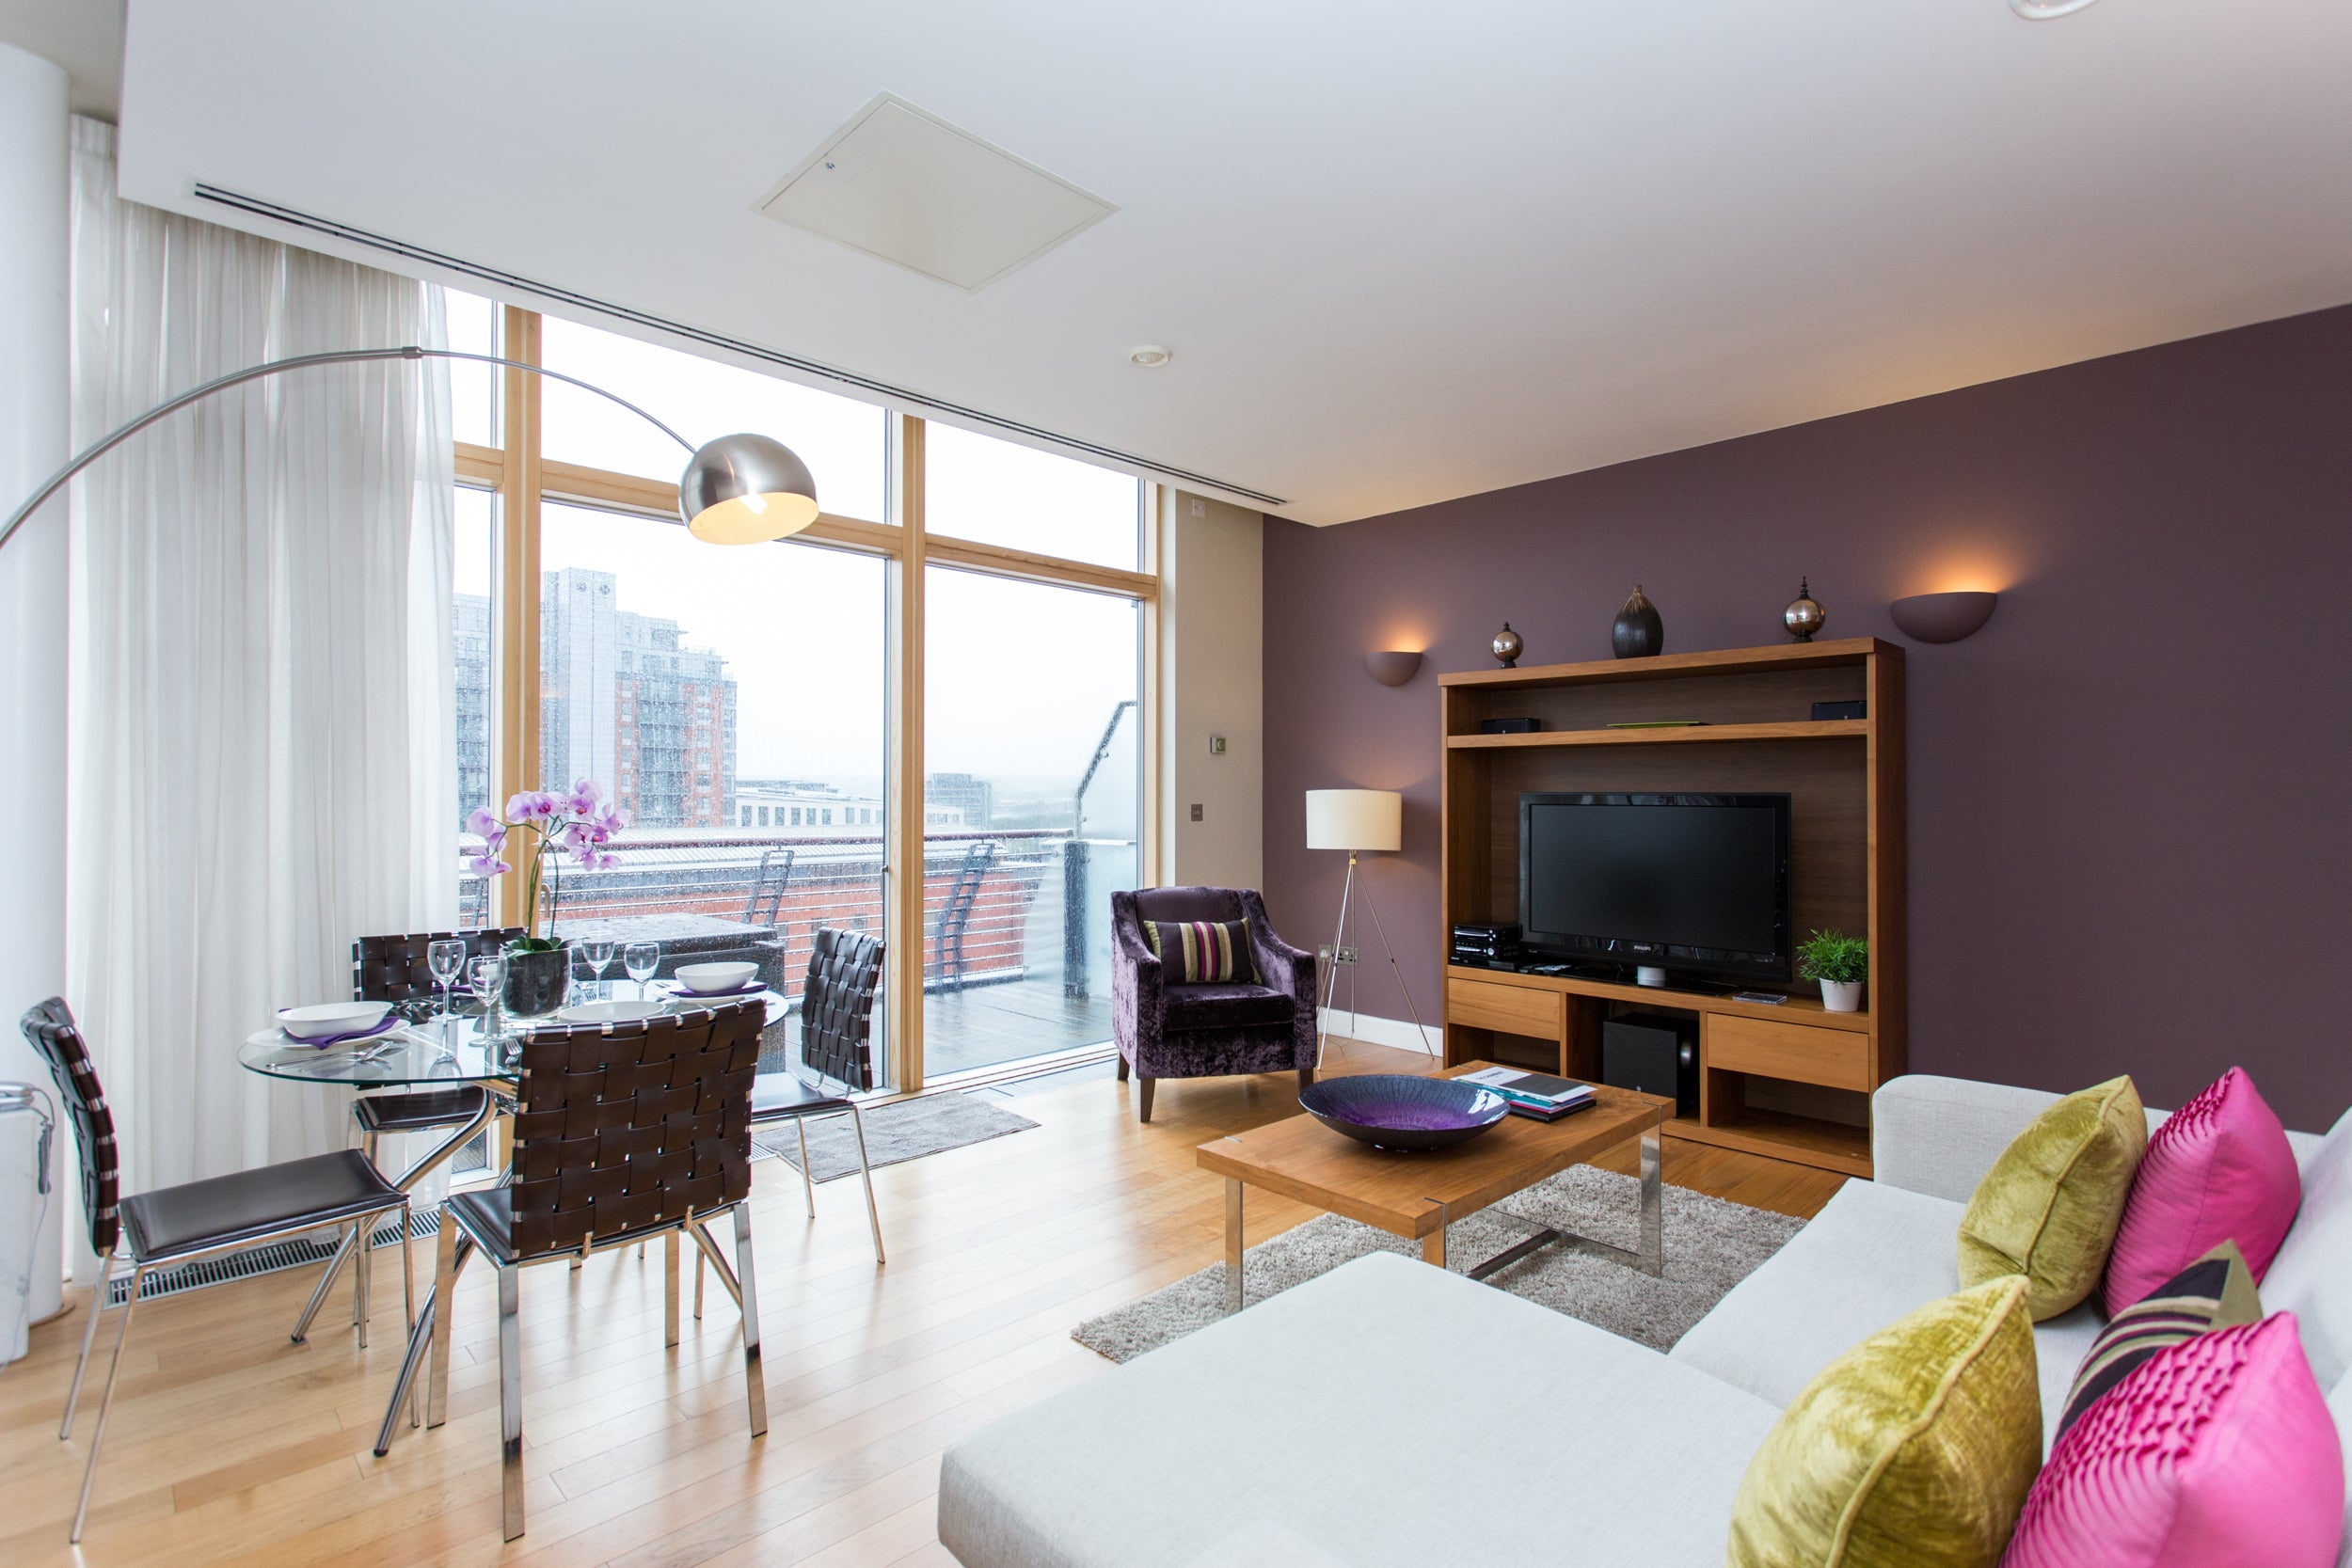 Chambers is located in a quiet corner of Leeds city centre